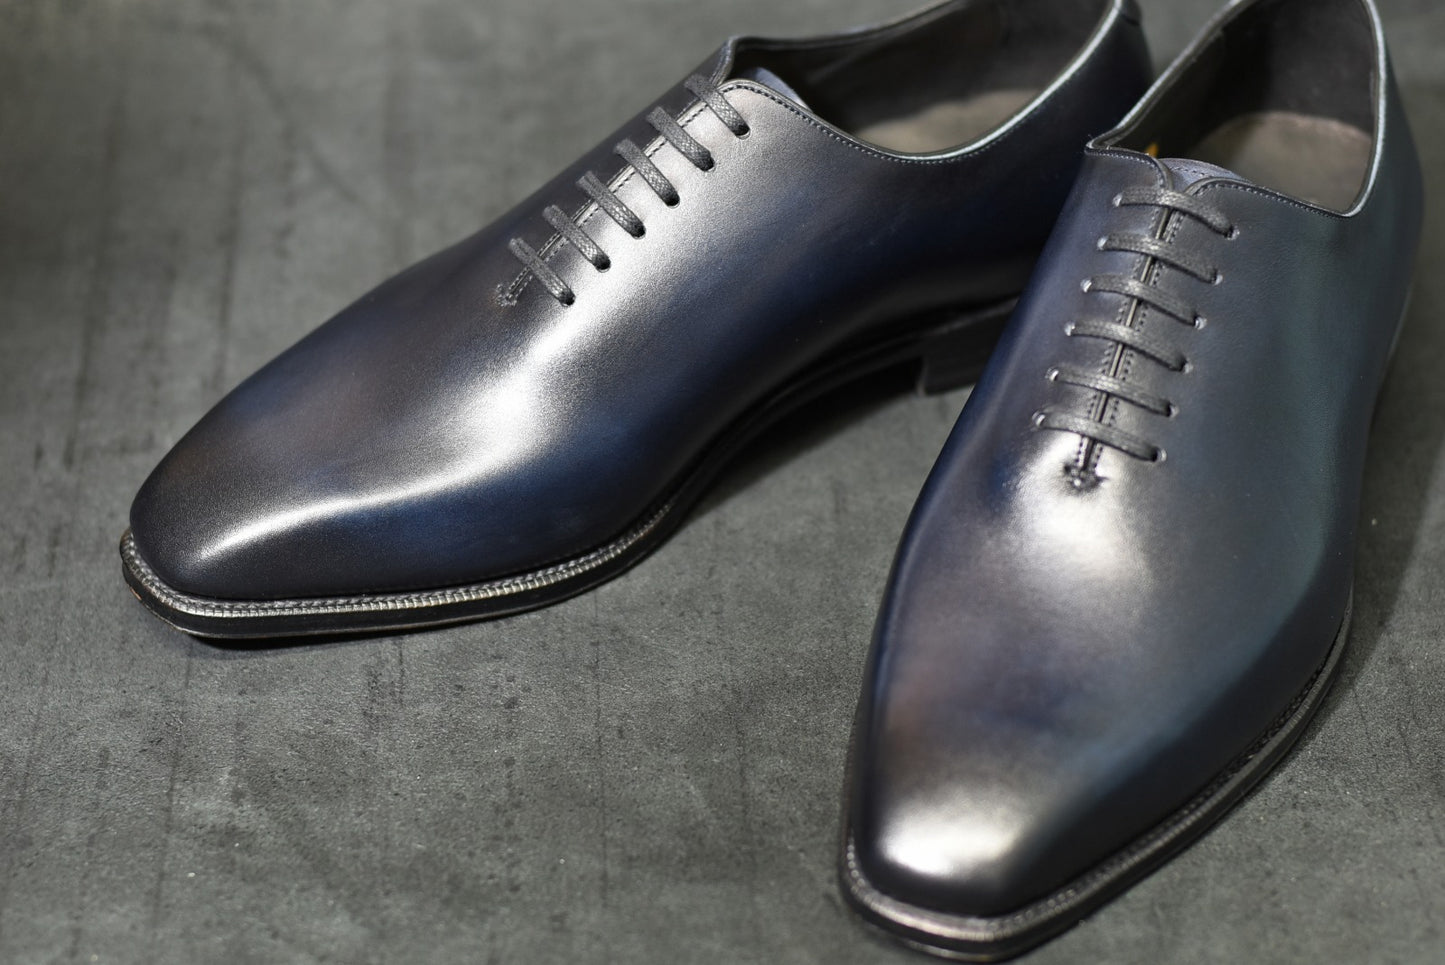 “Dolly” Chiseled Toe Whole Cut, Dark Navy Patina Dress Shoes, Annonay Vegano, Hand welted, US size 5 1/2 ~ 10